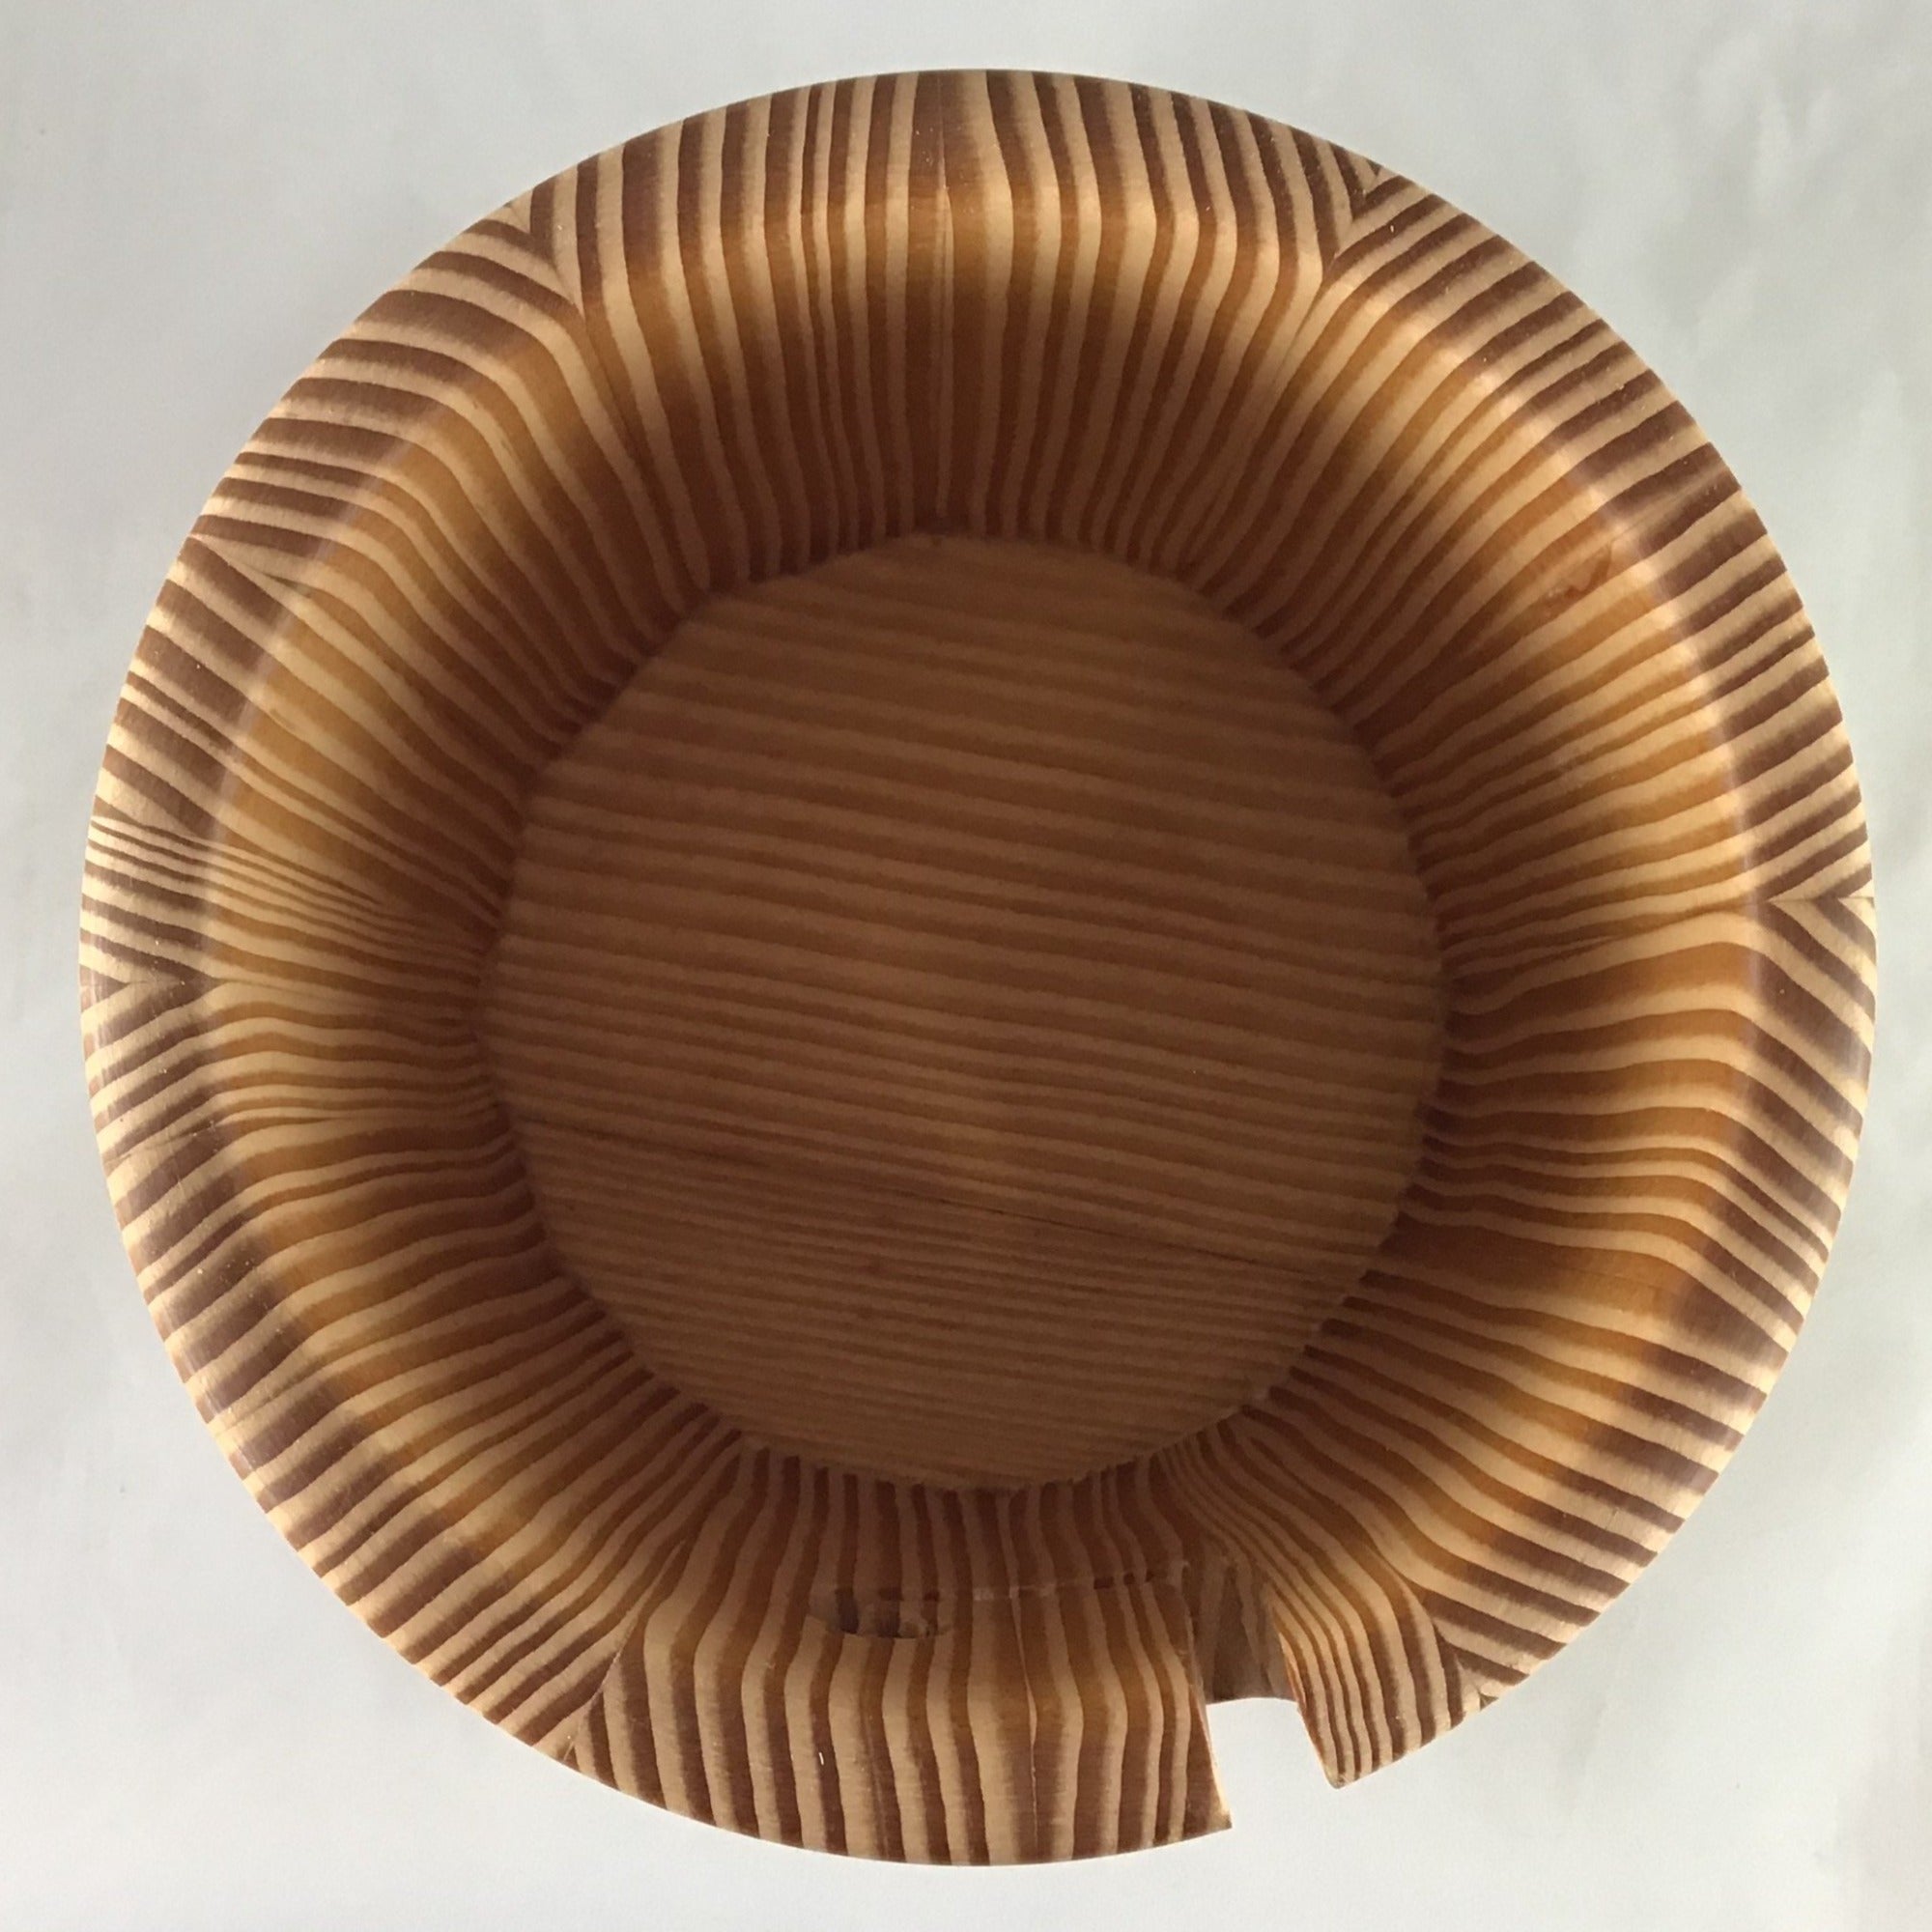  The inside of a wooden yarn bowl made from Douglas Fir wood against a white backdrop